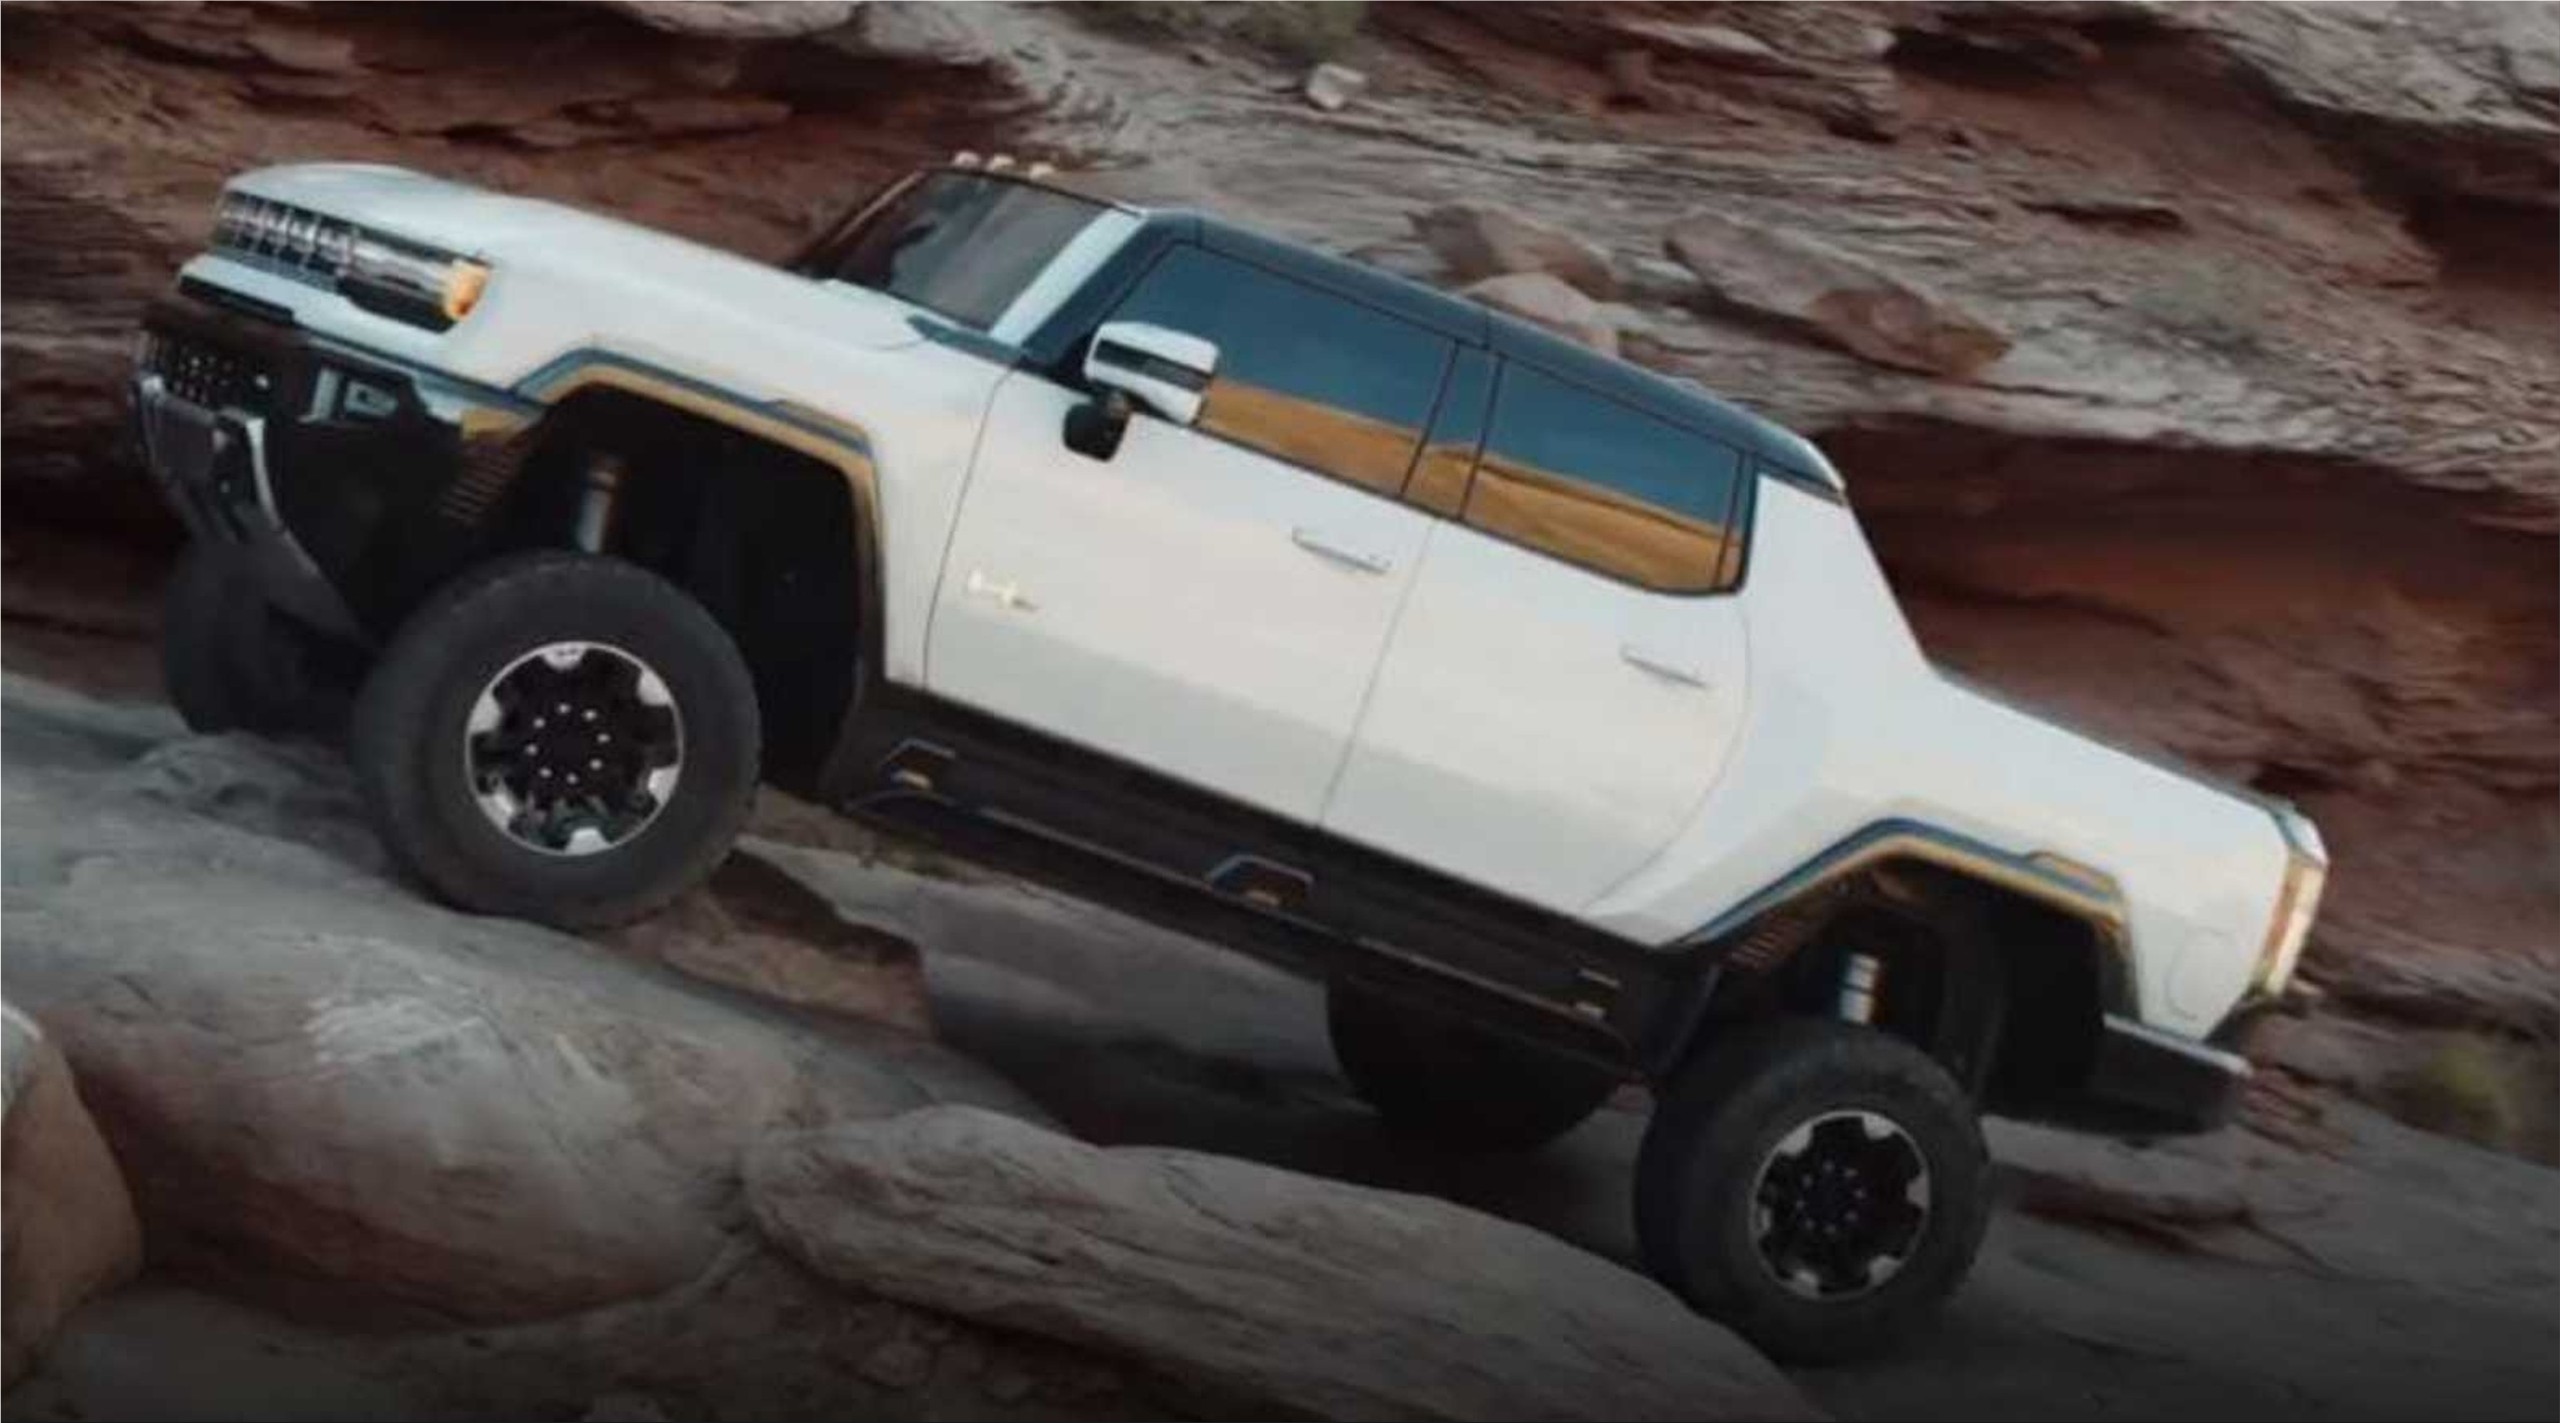 The new GMC Hummer EV electric pickup with 1000 hp